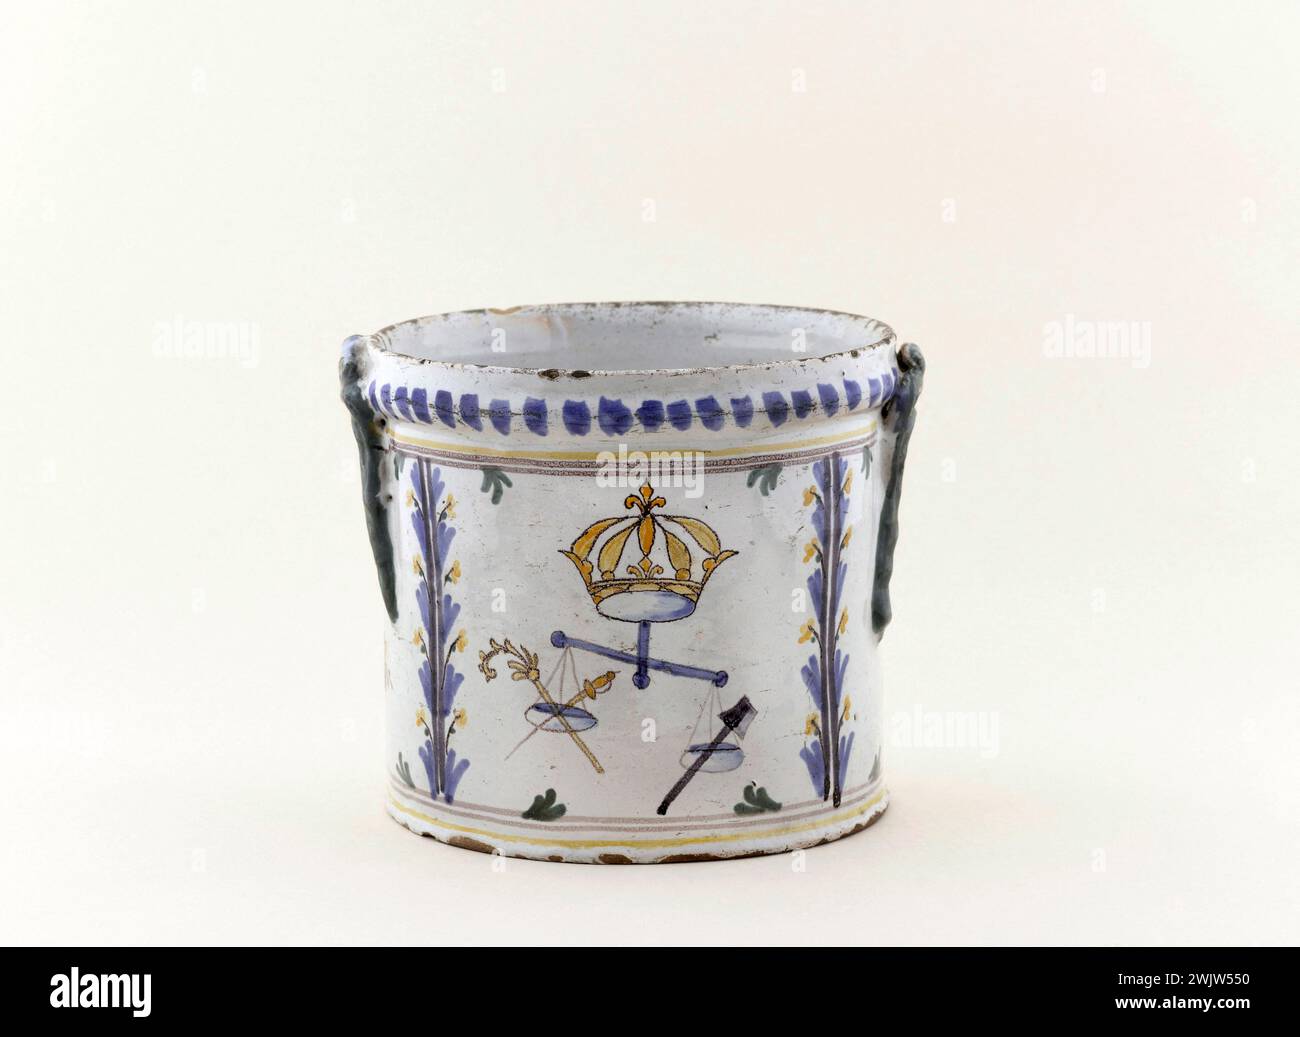 Anonymous. Three orders. Earthenware. 1789-1792. Paris, Carnavalet museum. 72437-21 Coach, Clerge, Decoration, Faience, nobility, Revolutionary Periode, French Revolution, Third Etat, three order Stock Photo